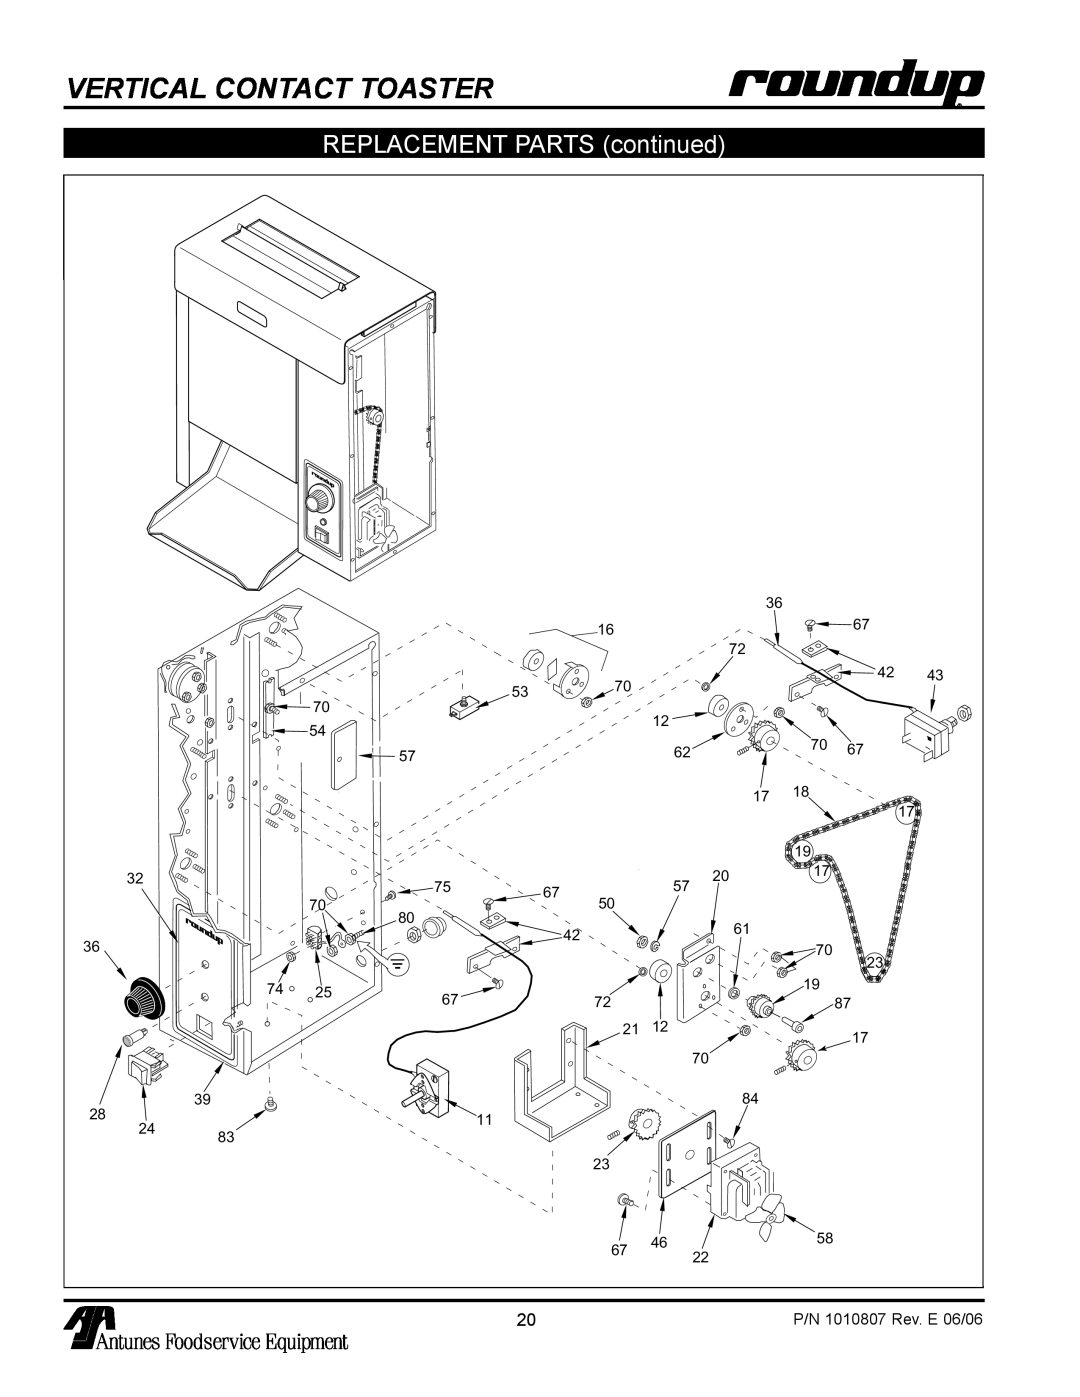 Antunes, AJ VCT-1000 owner manual Vertical Contact Toaster, REPLACEMENT PARTS continued 